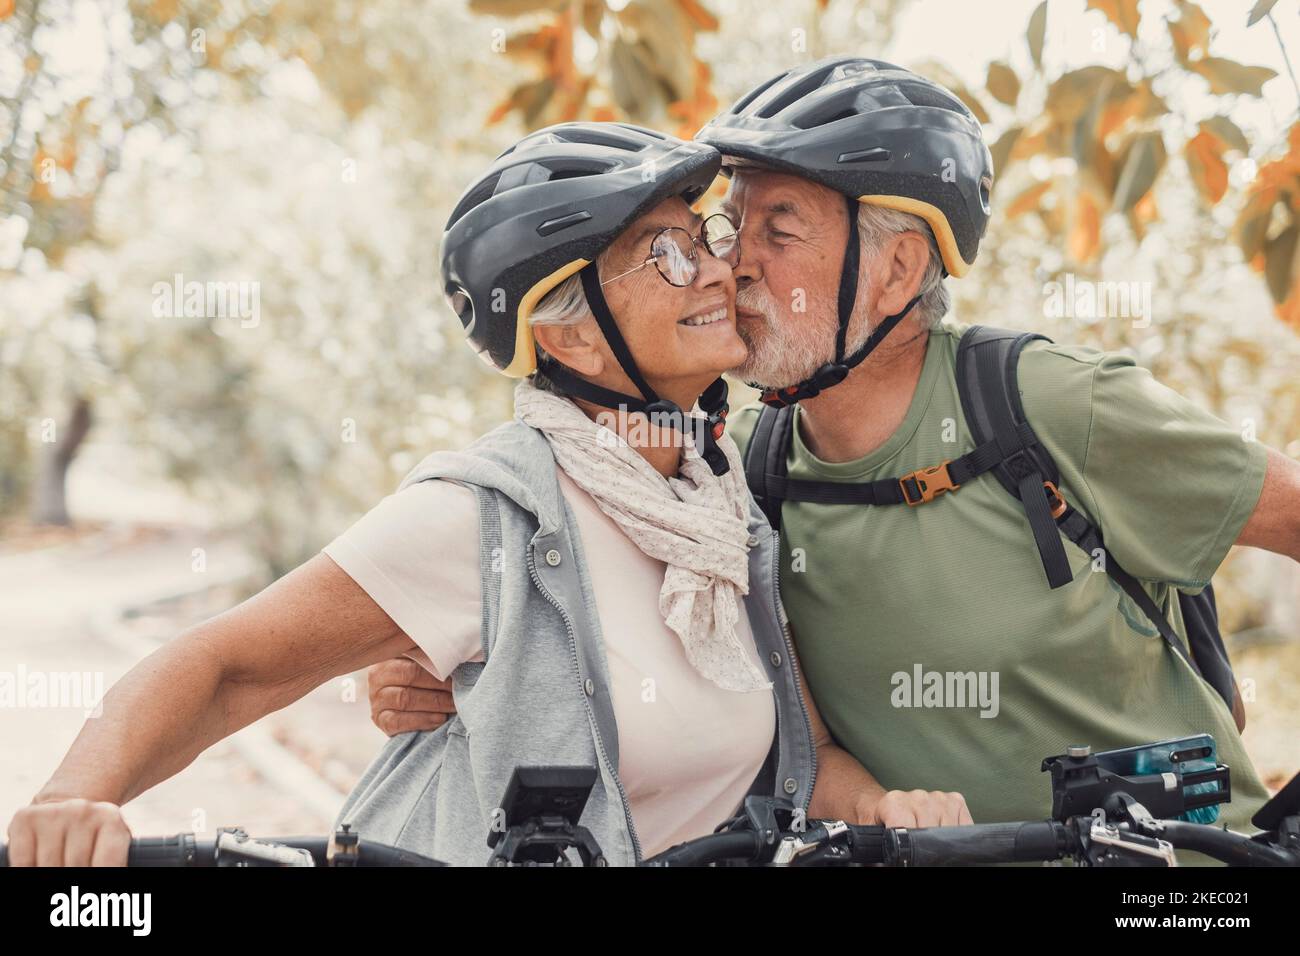 Couple of cute and sweet seniors in love enjoying together nature outdoors having fun with bikes. Old man kissing his wife smiling and feeling good. Stock Photo